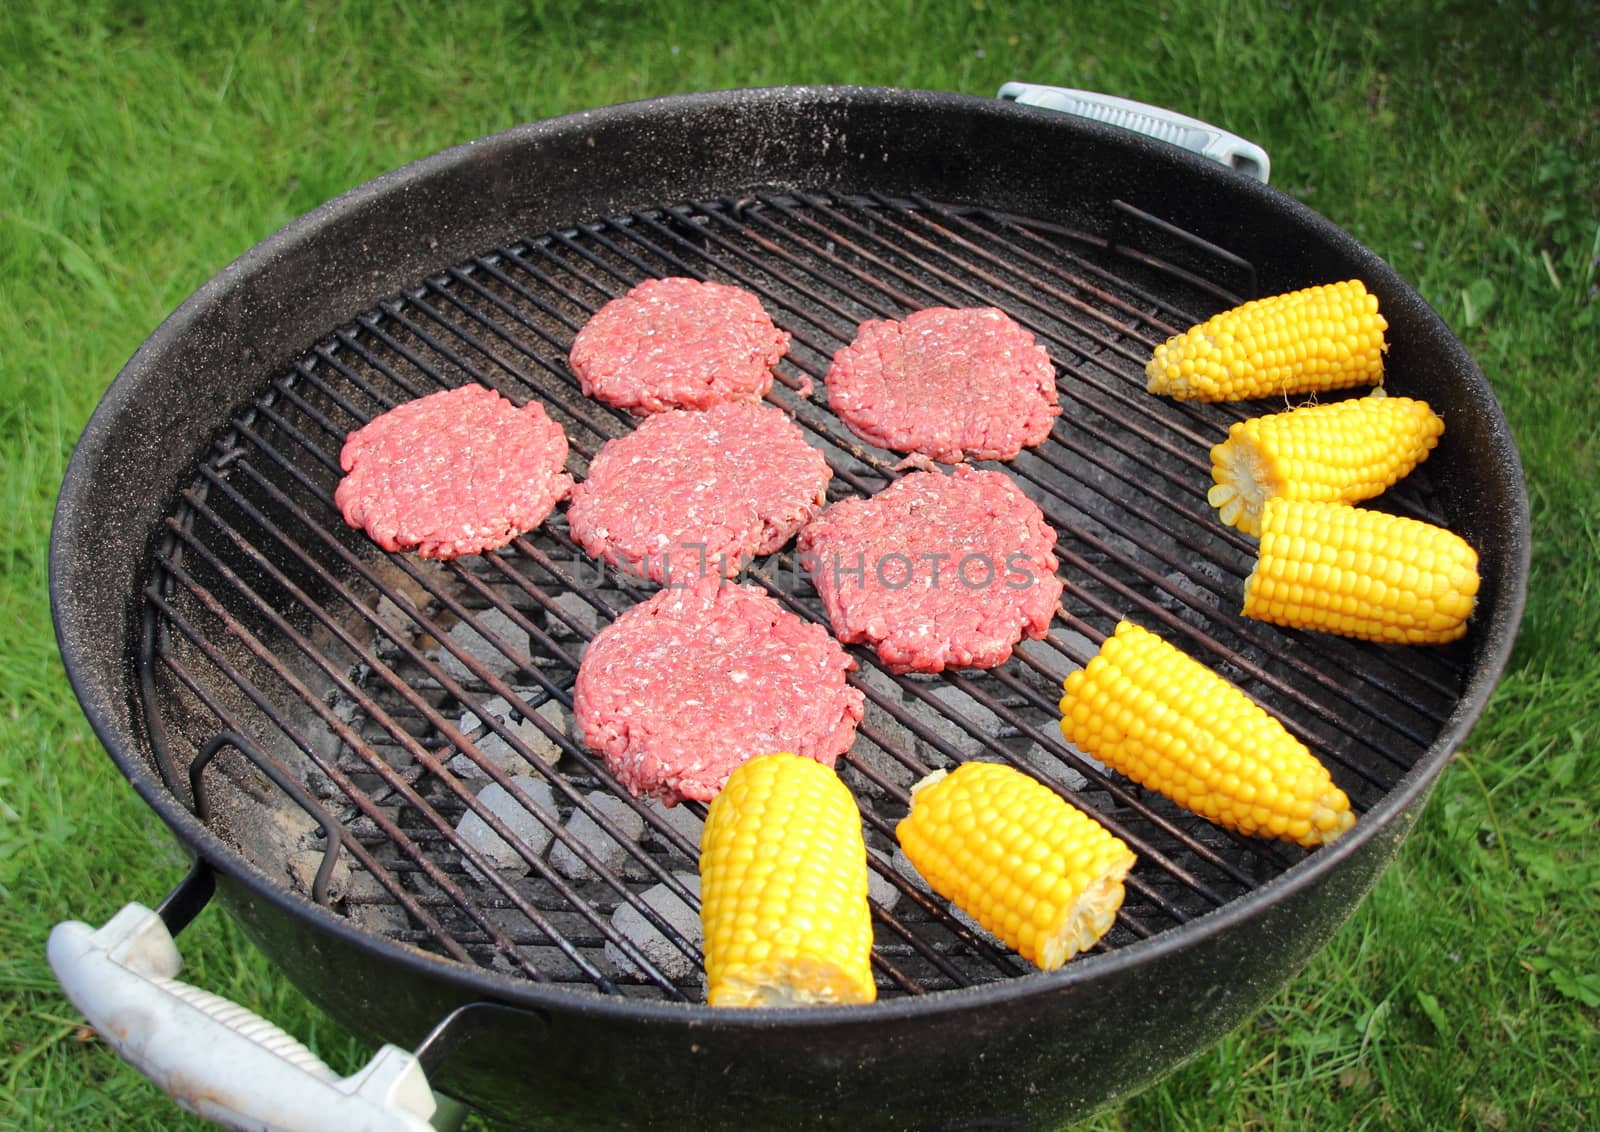 Barbeque grill with beef burger and corncob